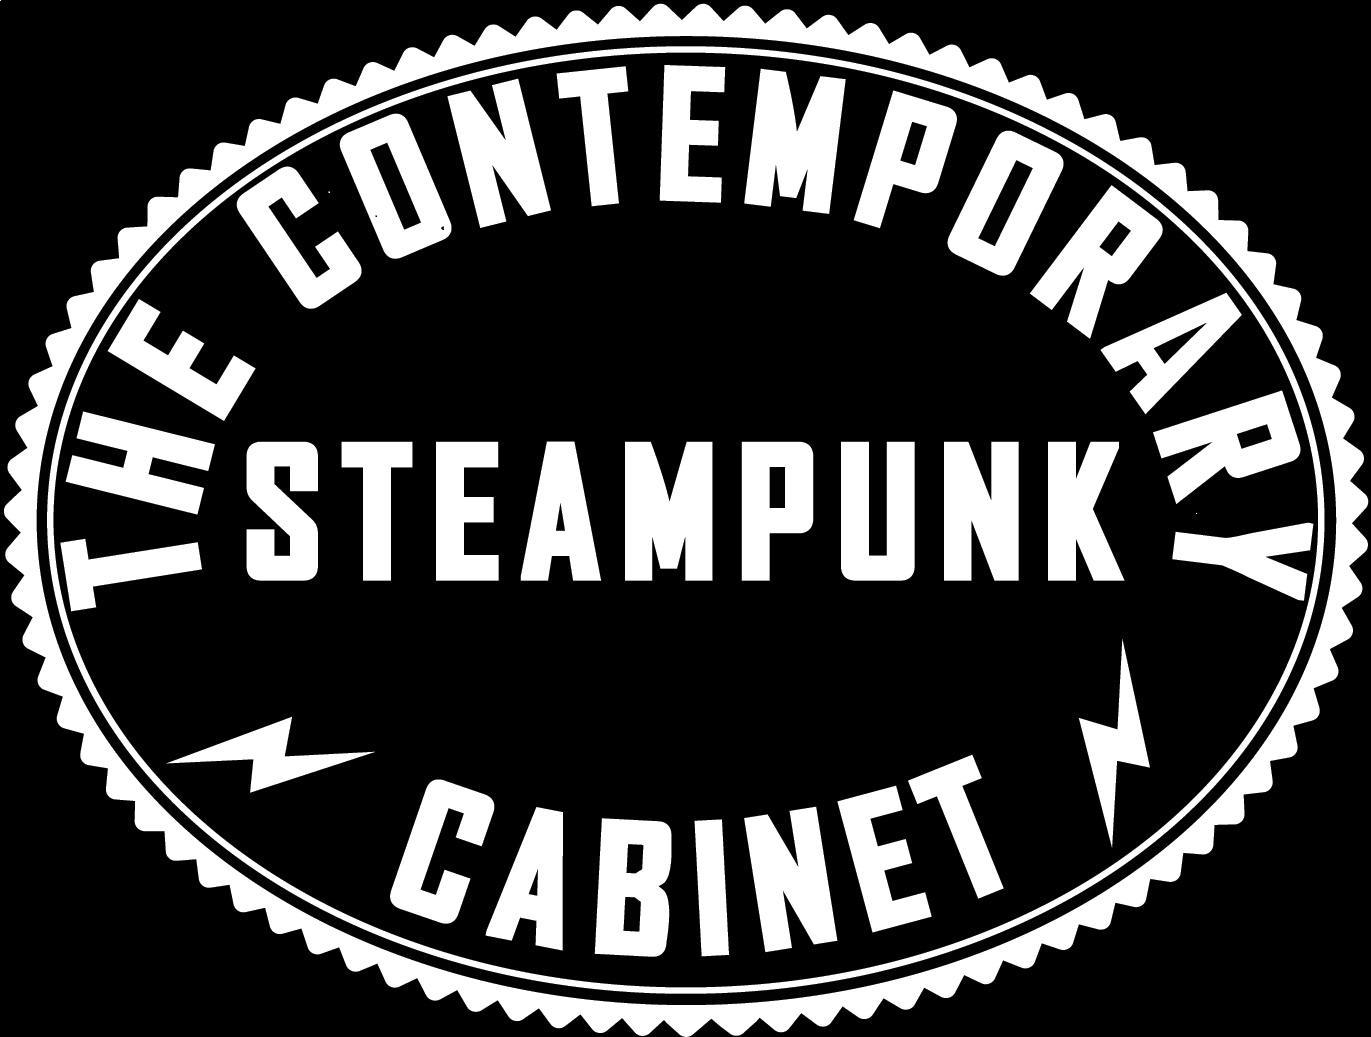 THE CONTEMPORARY STEAMPUNK CABINET logo All rights reserved